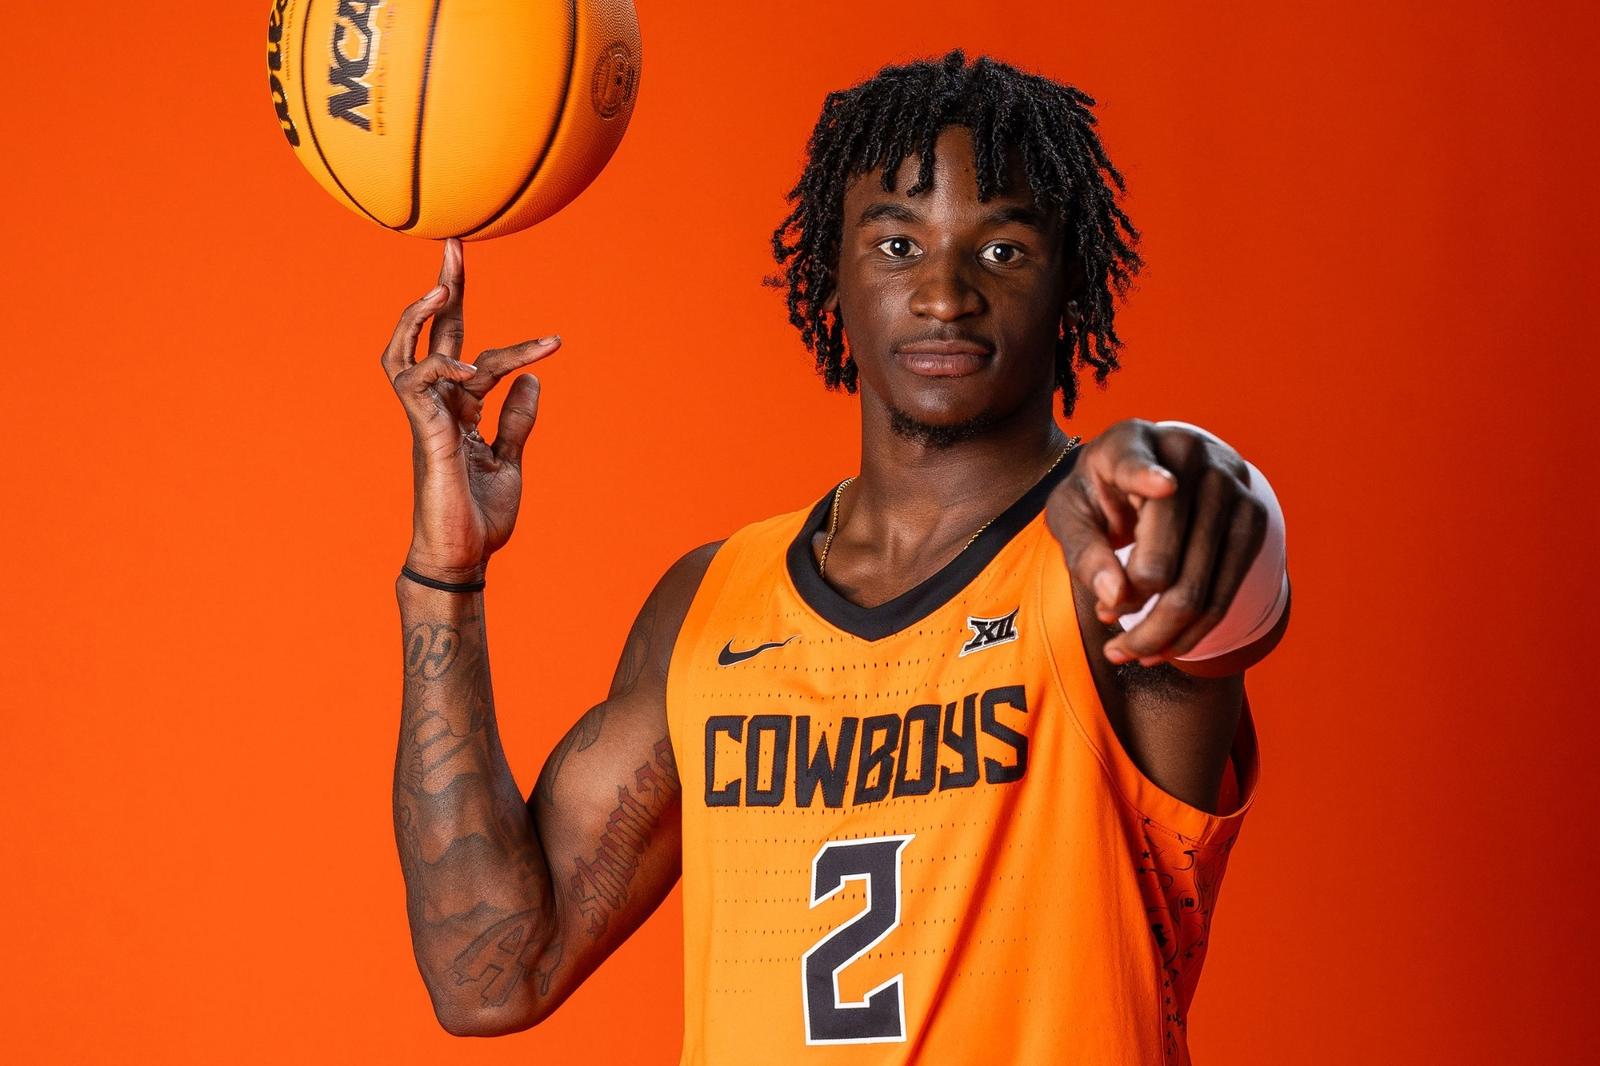 NCAA steals leader Dean signs with Cowboy Basketball